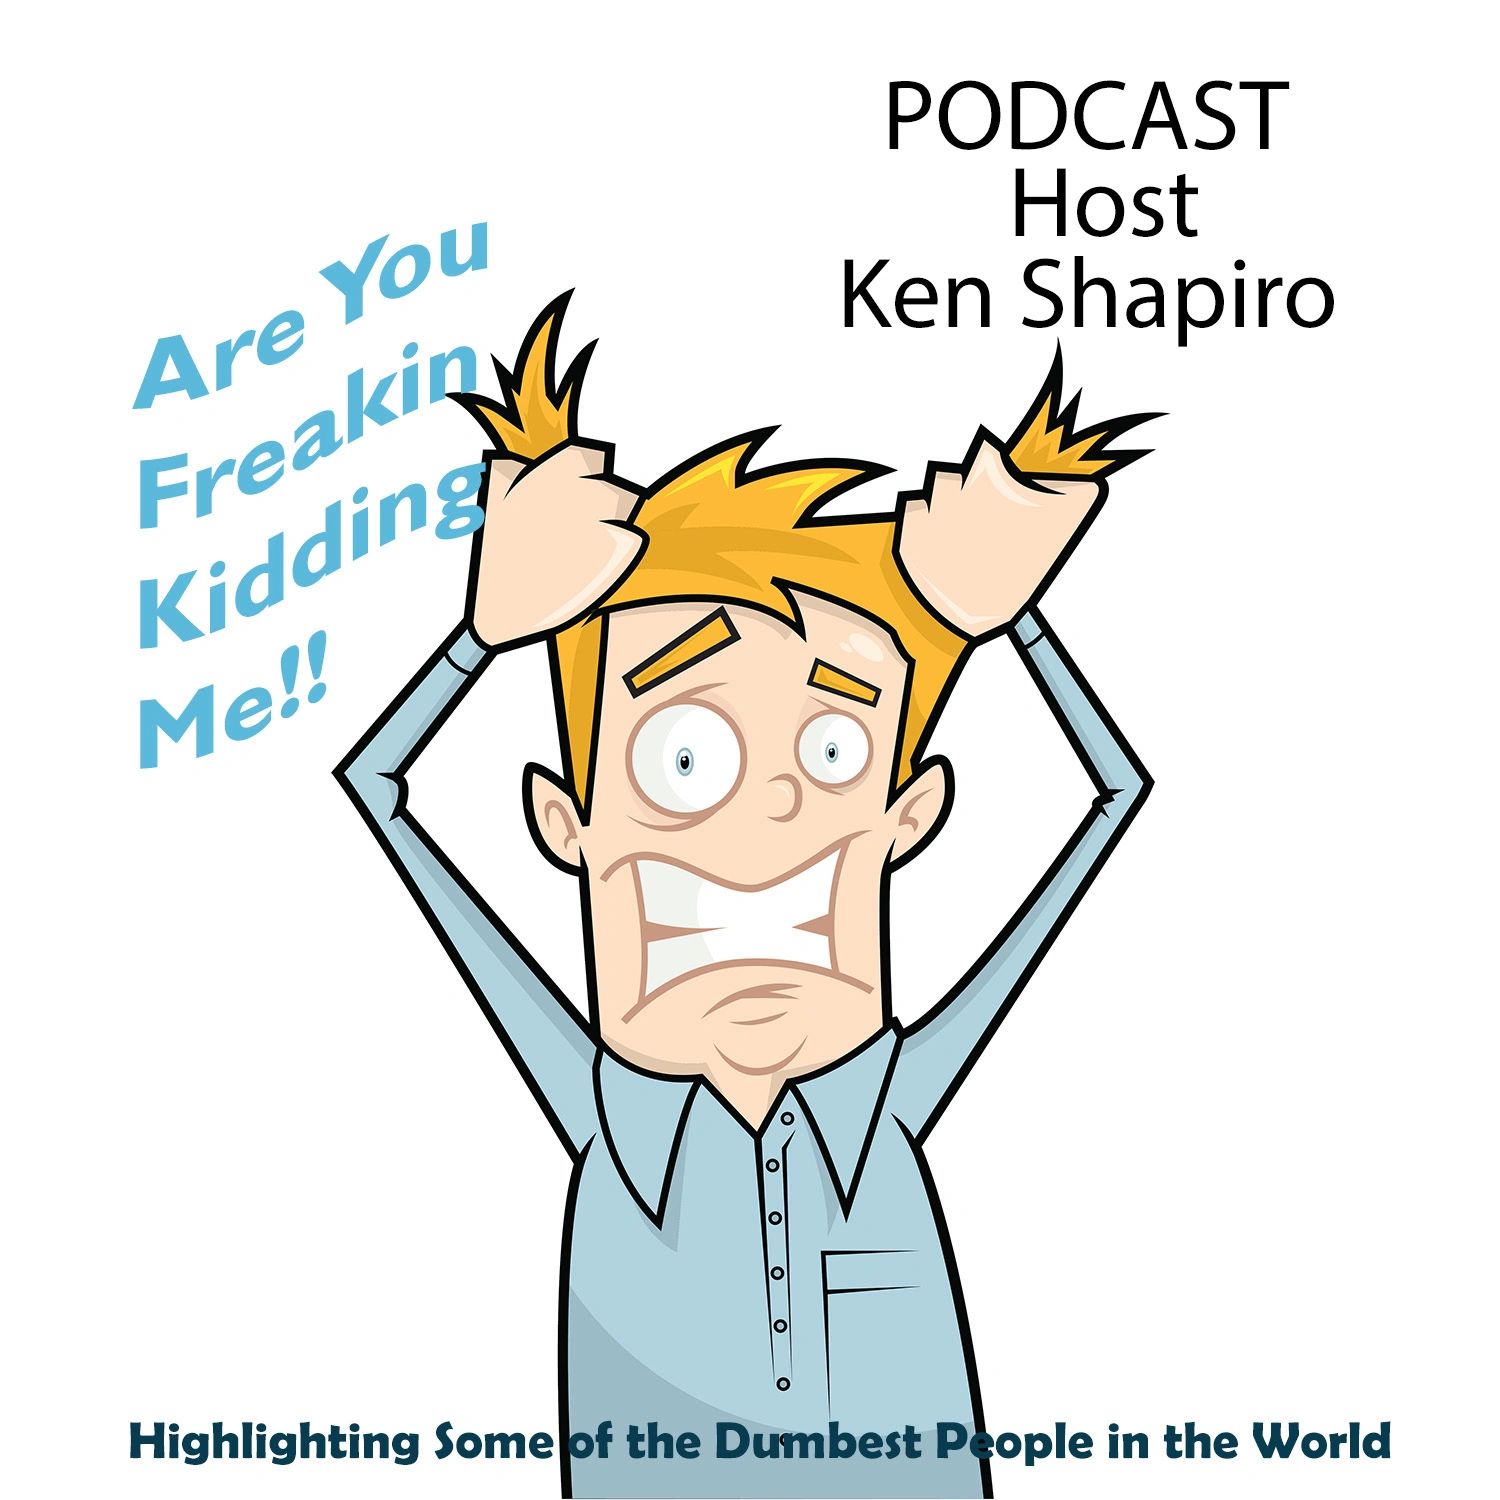 Podcaster Ken Shapiro reviews events by stupid people that make you say "Are You Freakin Kidding Me"